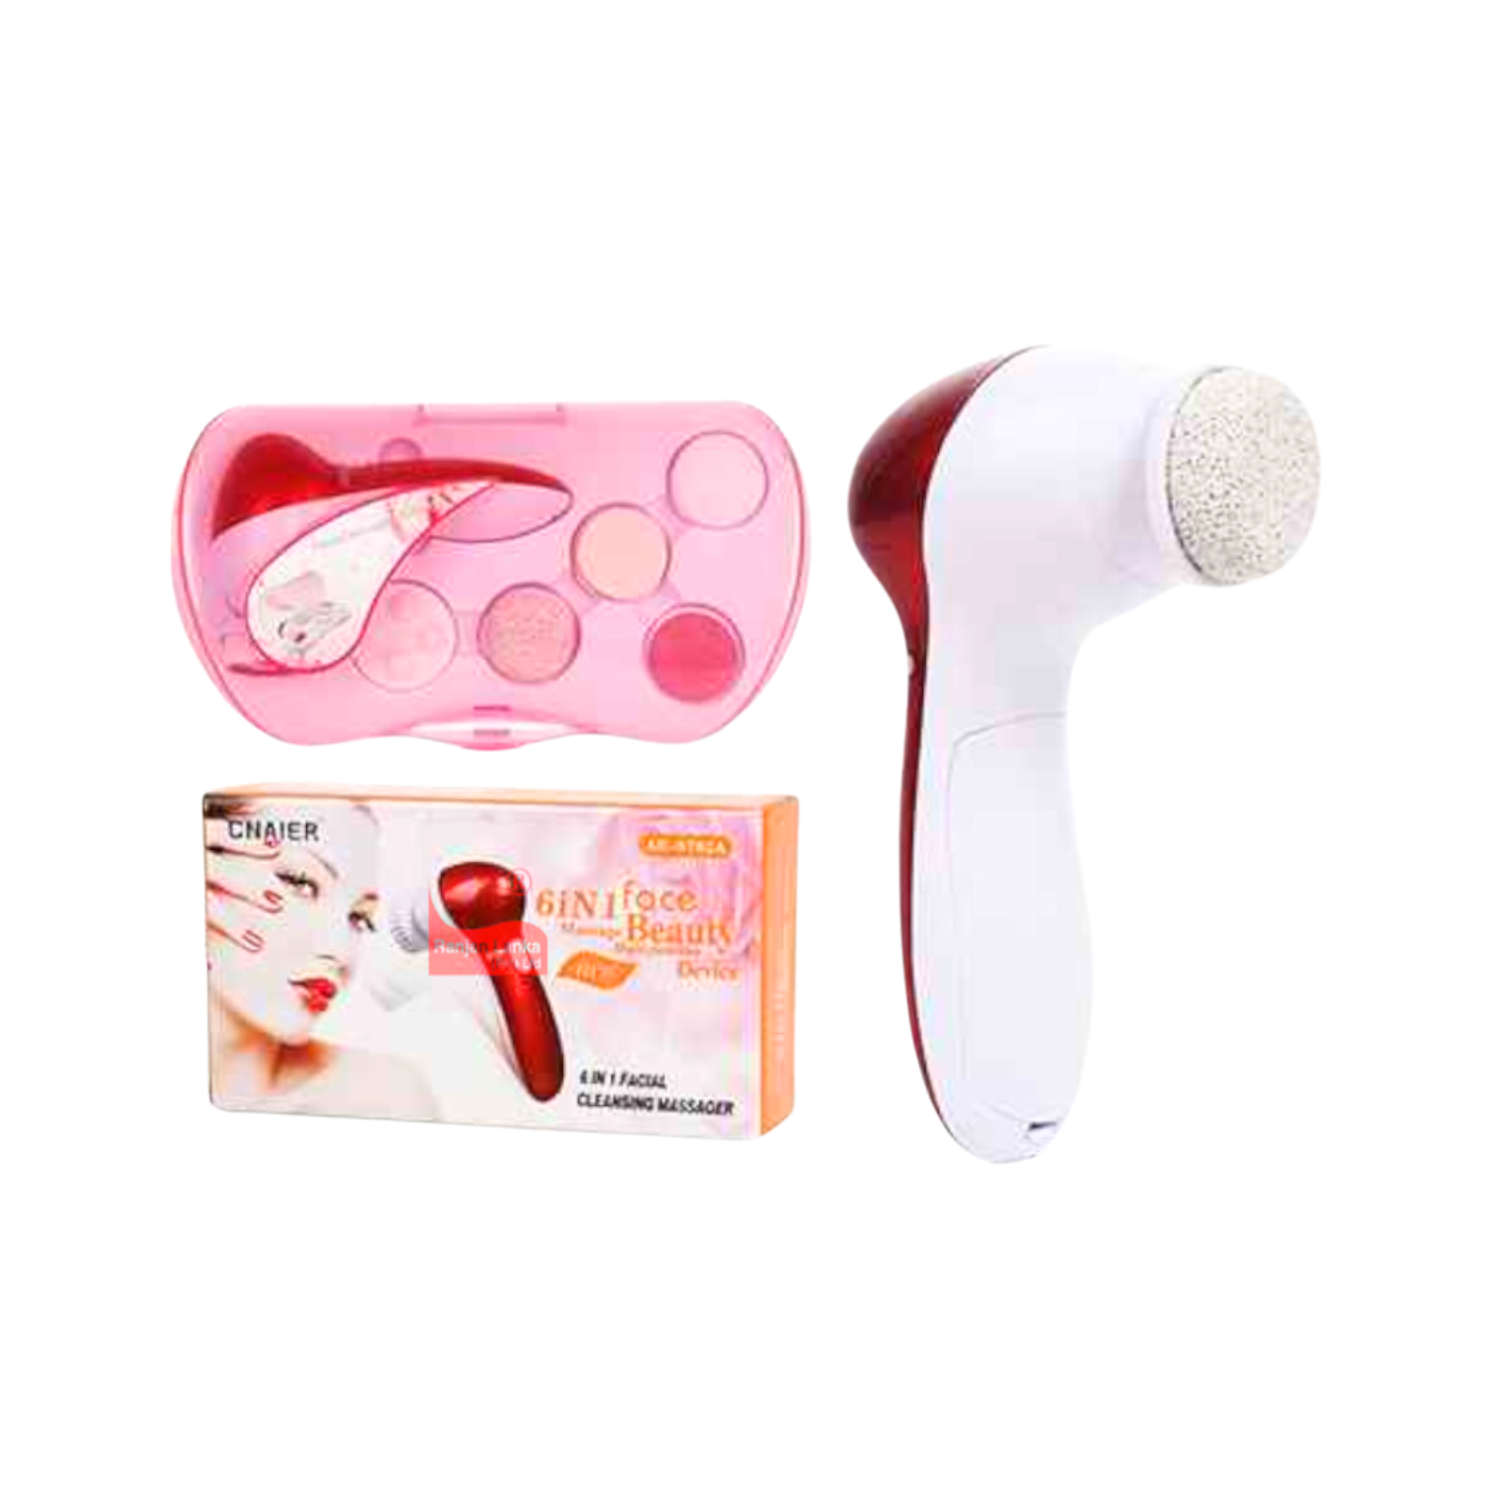 cnaier-6-in-1-face-beauty-multi-funtion-device-ae-8782a